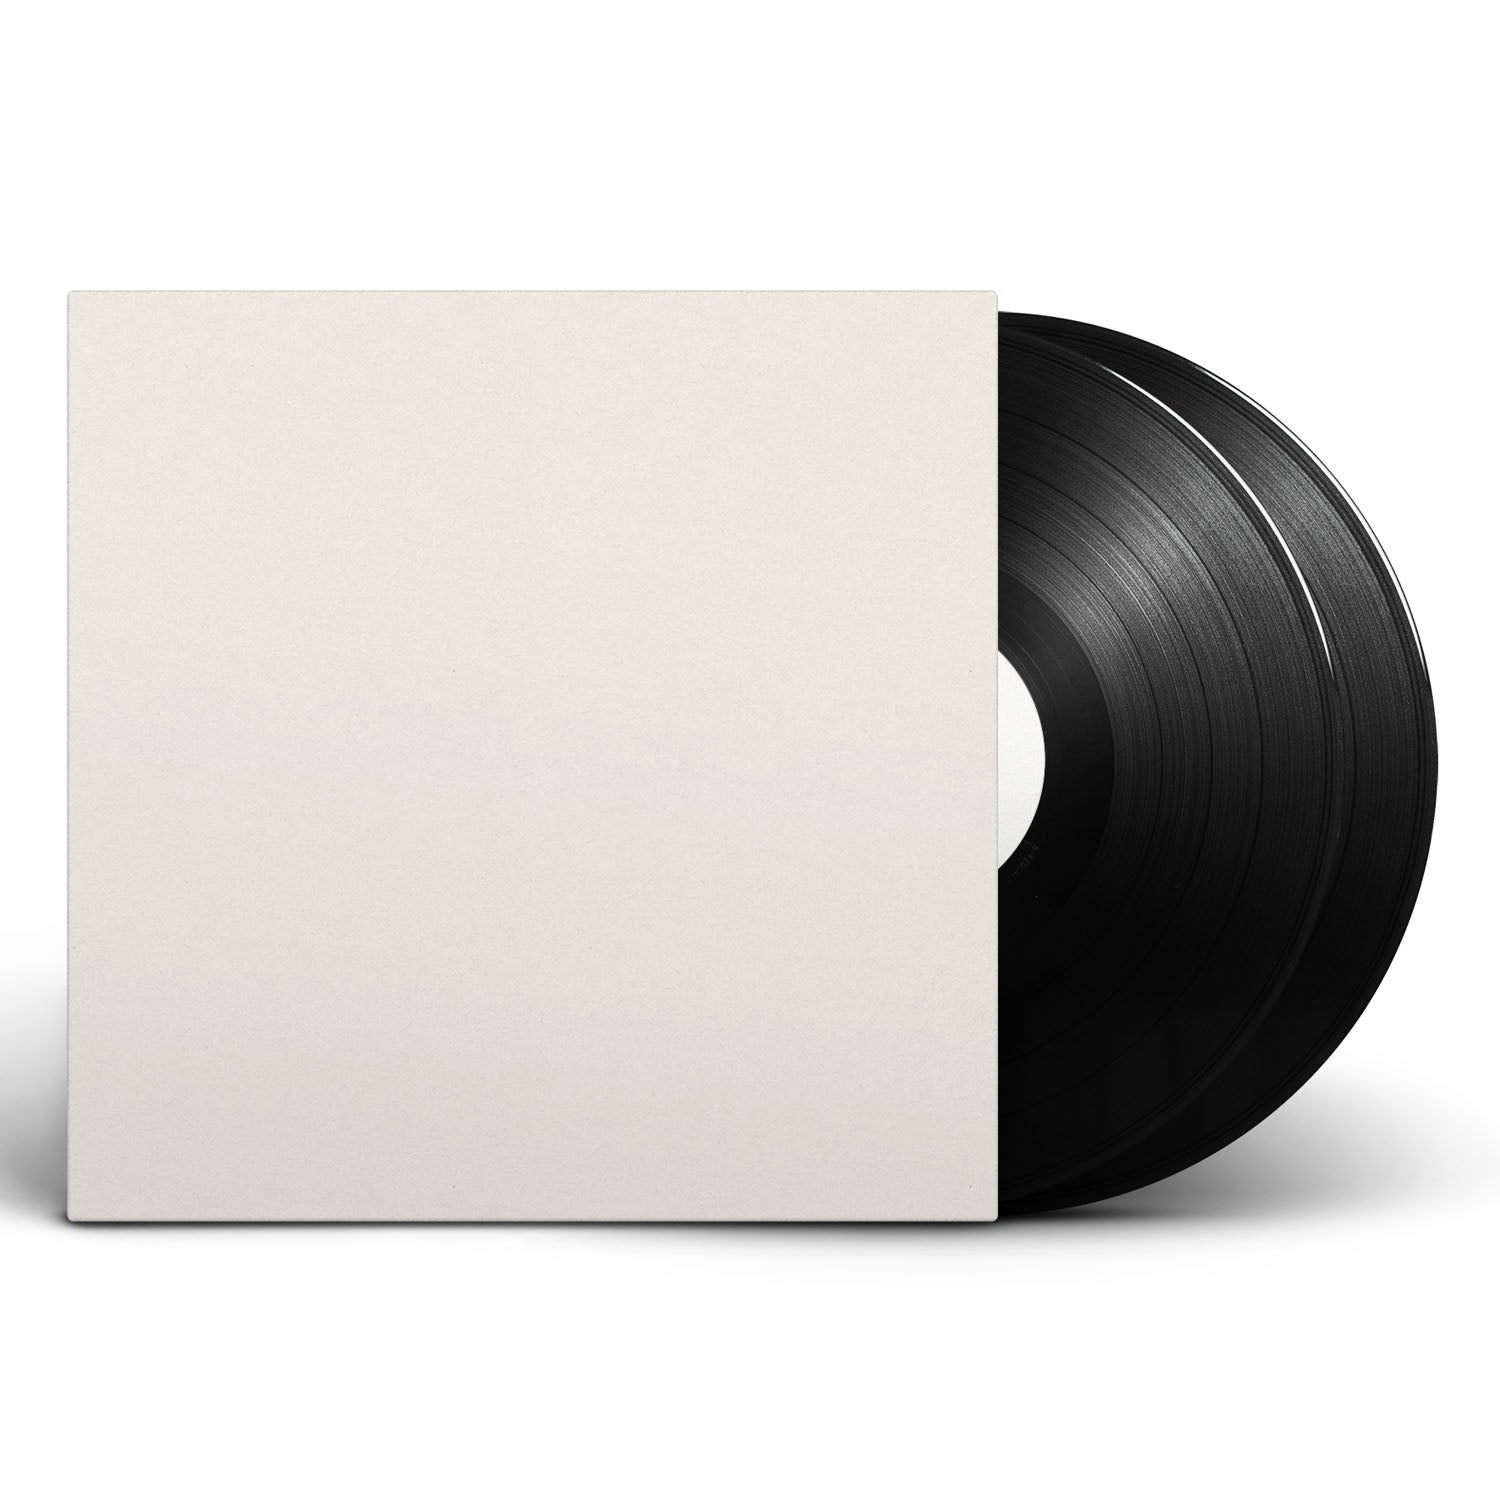 Caroline Rose - The Art of Forgetting [Audiophile Collector's Edition Test Pressing]